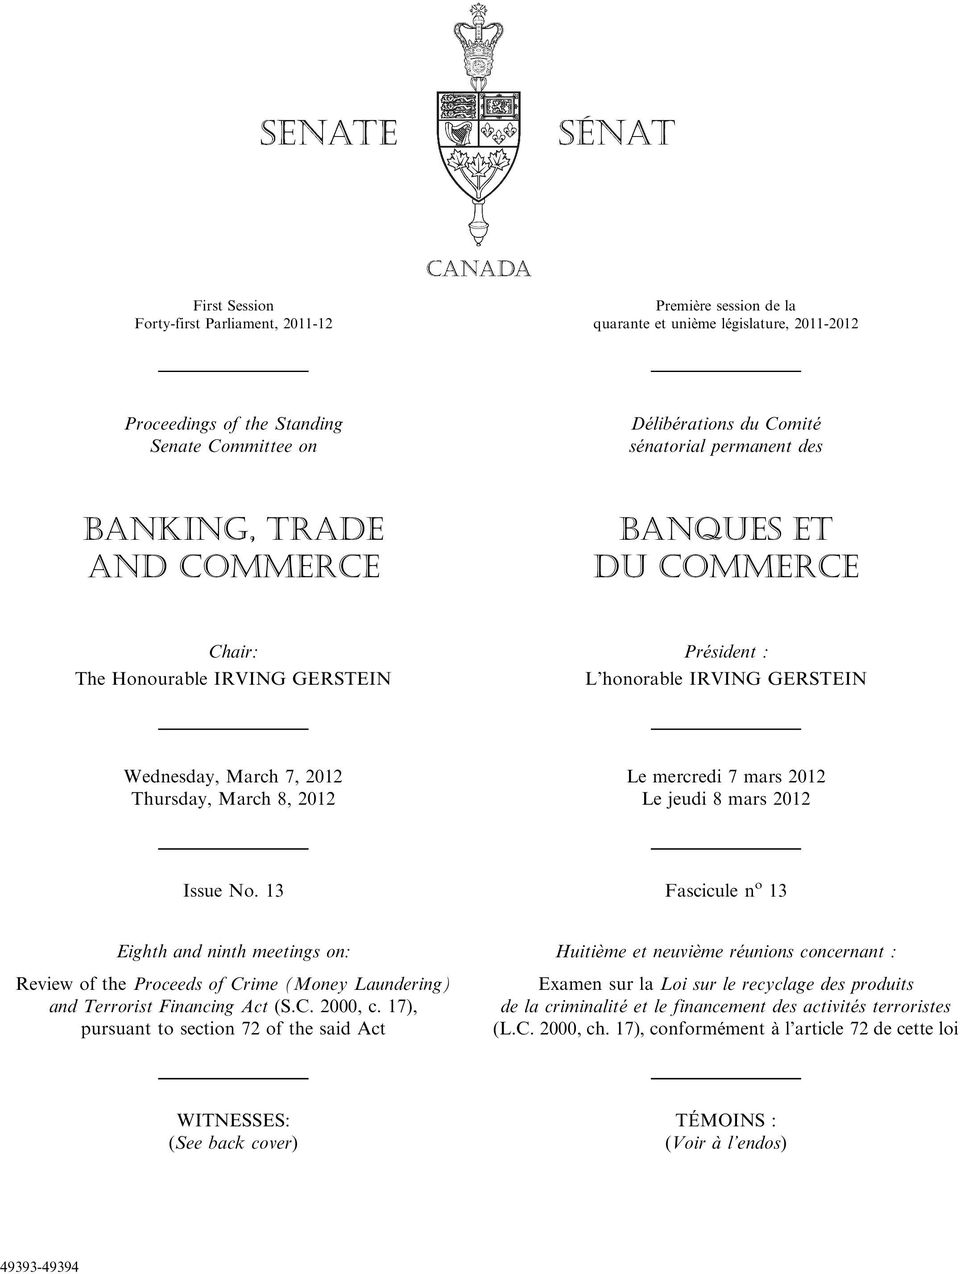 mercredi 7 mars 2012 Le jeudi 8 mars 2012 Issue No. 13 Fascicule n o 13 Eighth and ninth meetings on: Review of the Proceeds of Crime (Money Laundering) and Terrorist Financing Act (S.C. 2000, c.